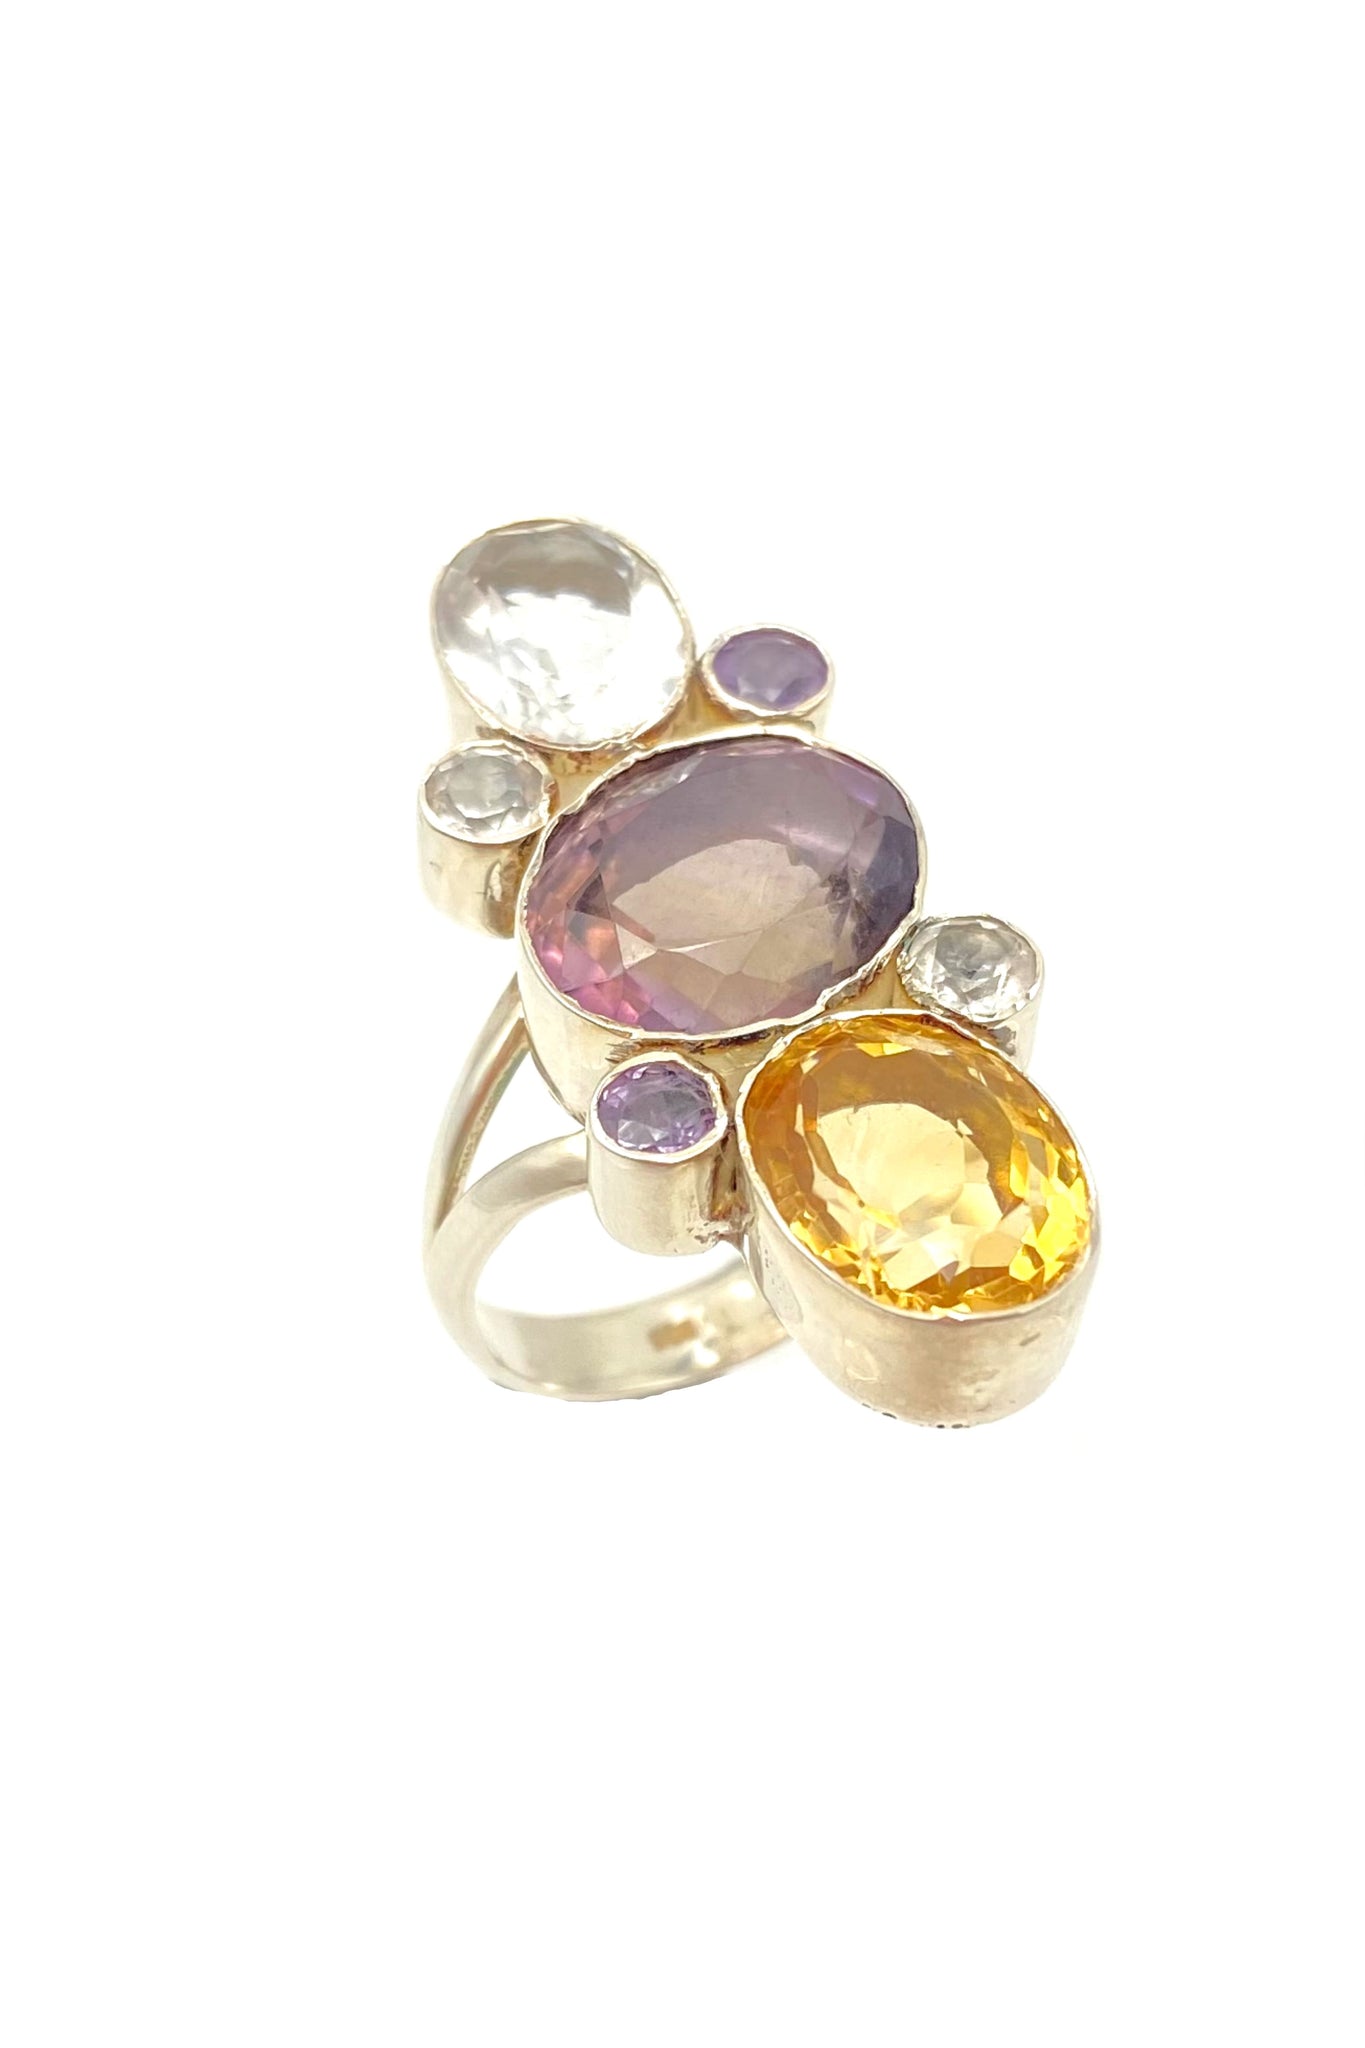 Eremis Citrin, Amethyst, and Crystal Ring - 925 Silver